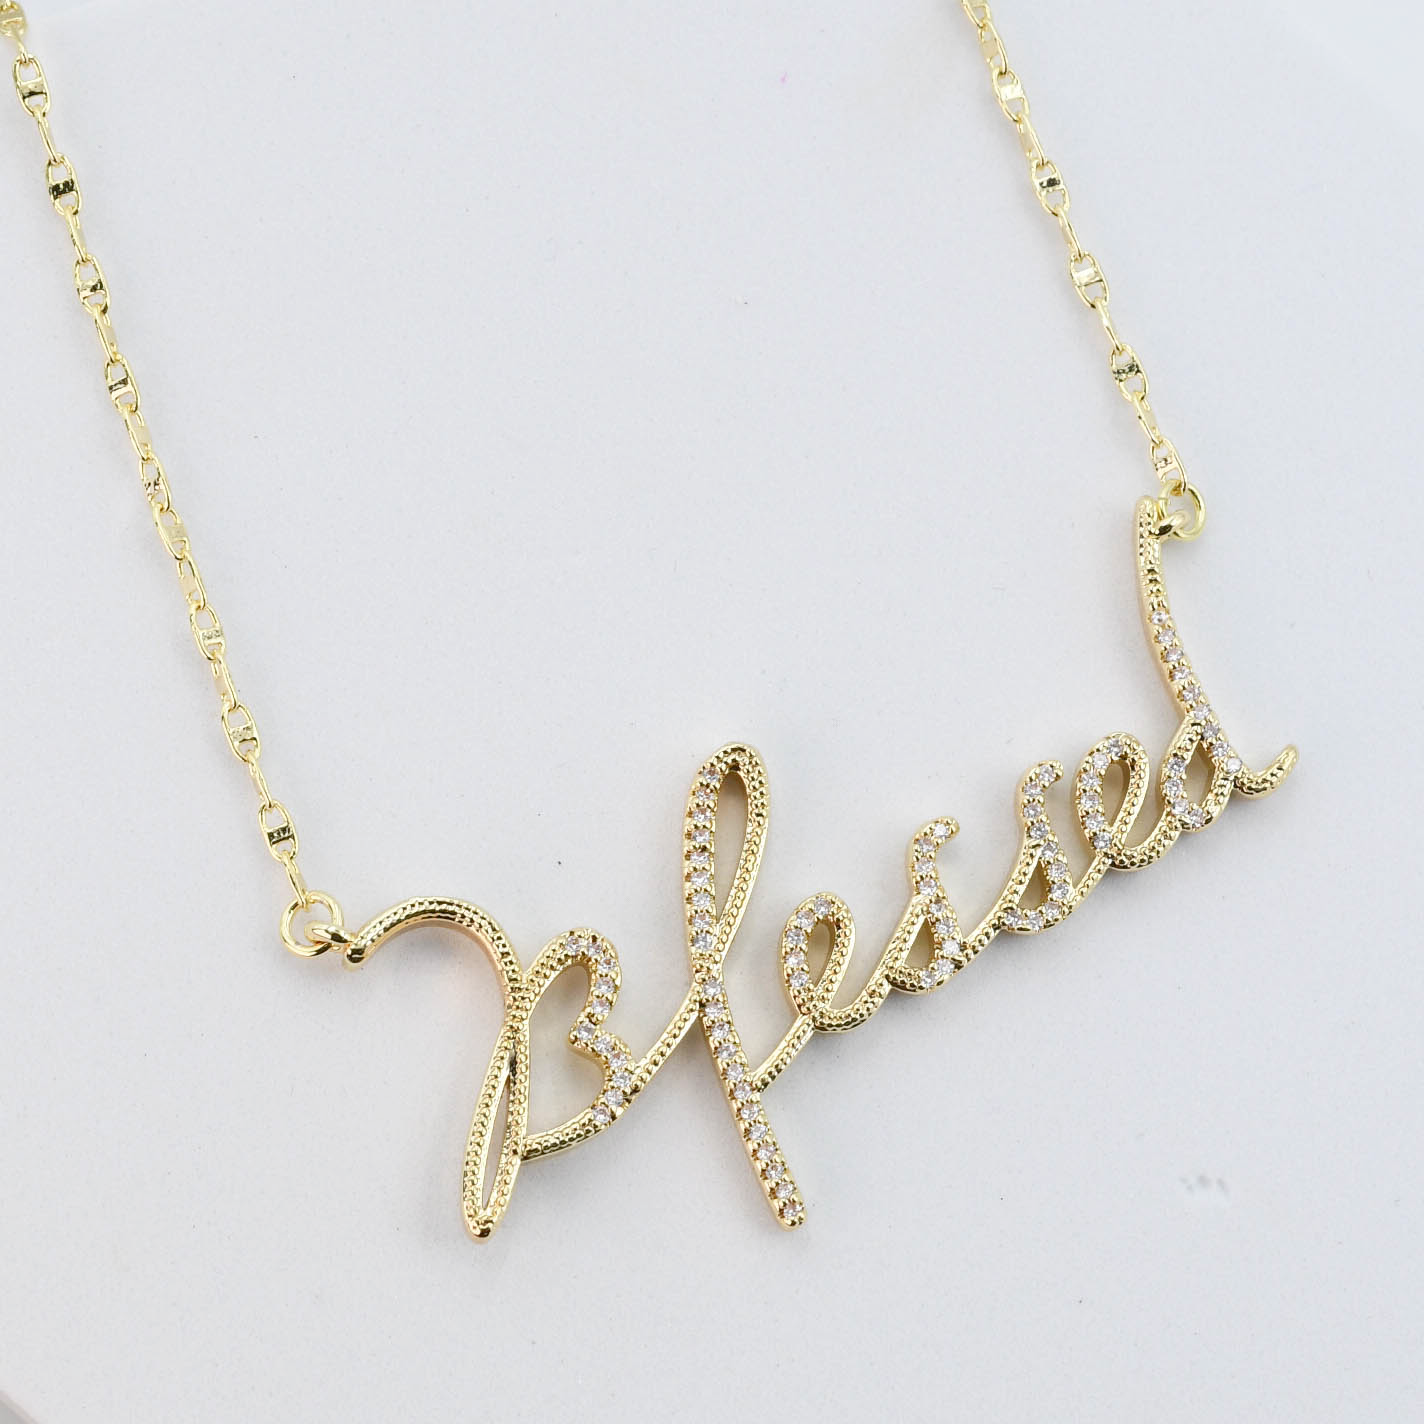 Blessed 14K Gold-Plated Necklace